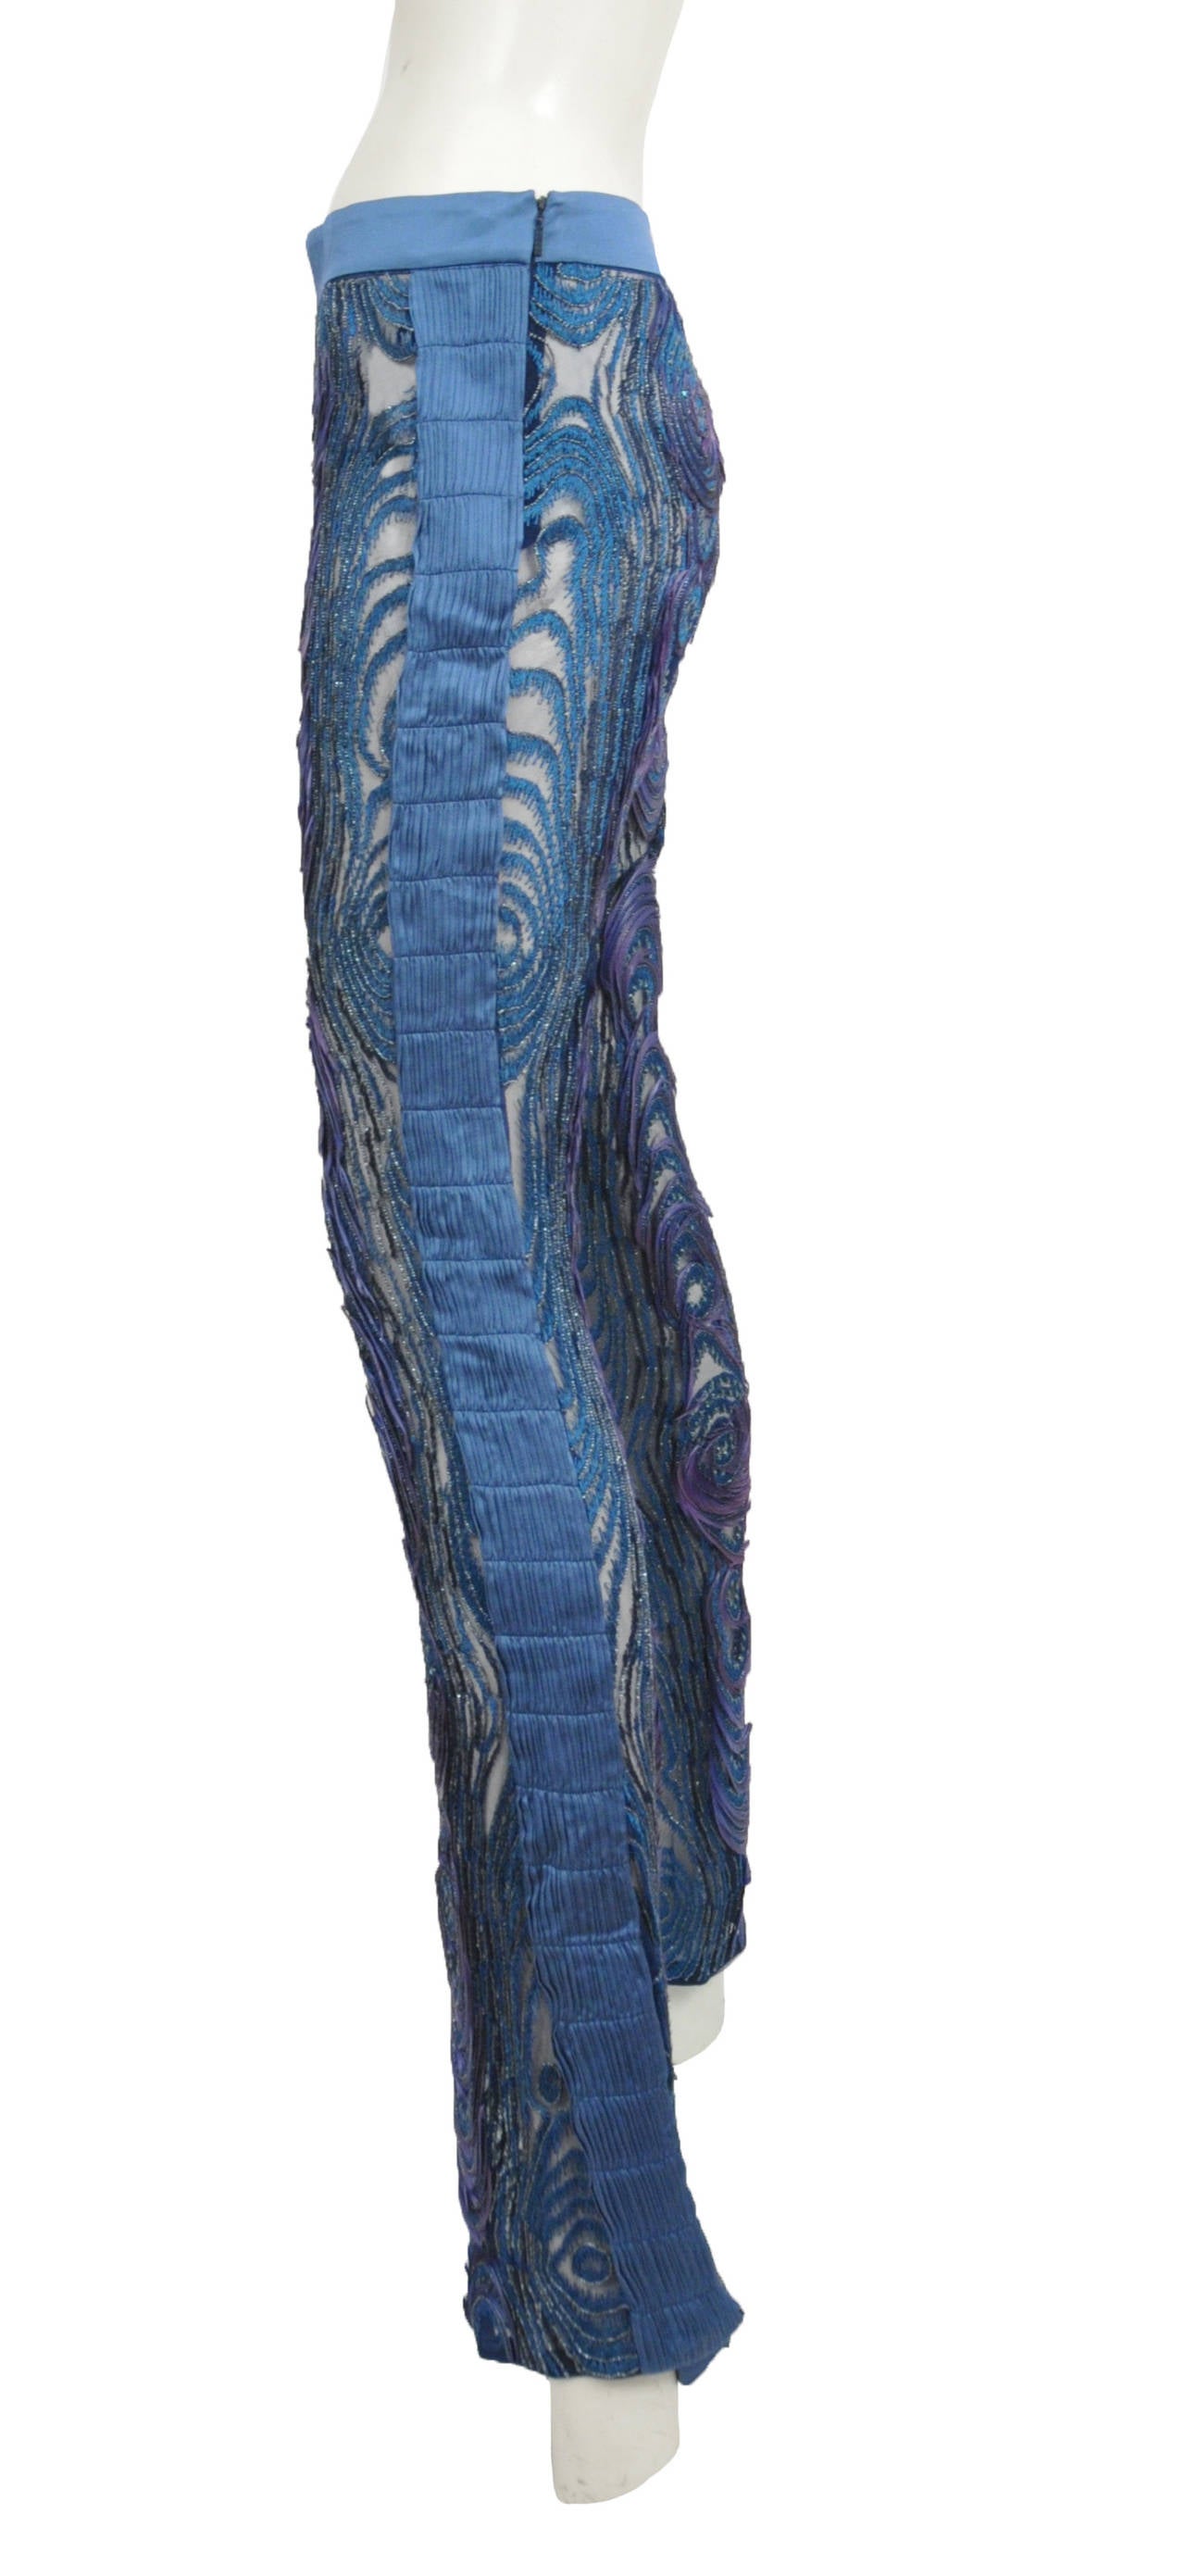 Vintage Tom Ford for Gucci blue and purple beaded and embroidered mesh pants.  The pants feature detailed bead work, embroidery, and feathers and are made up of a satin/cotton blend.
Circa 2004.